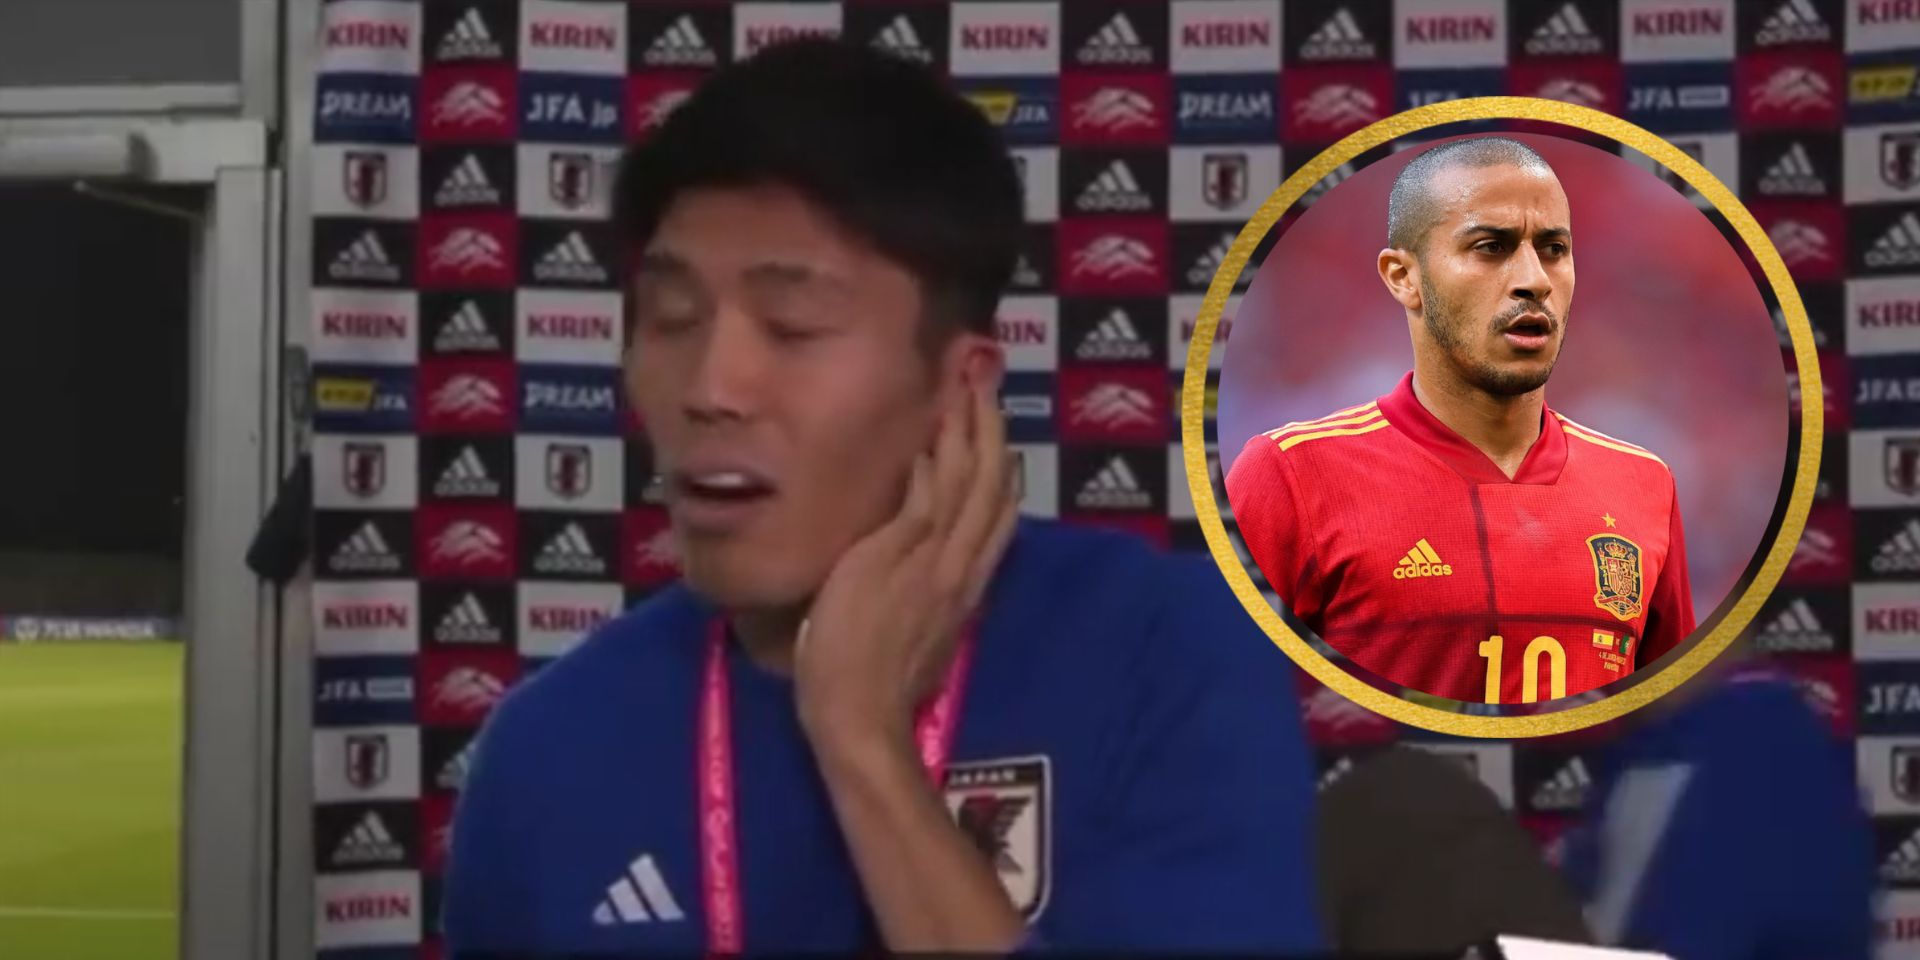 (Video) Tomiyasu in shock that Liverpool player hasn’t made the World Cup squad